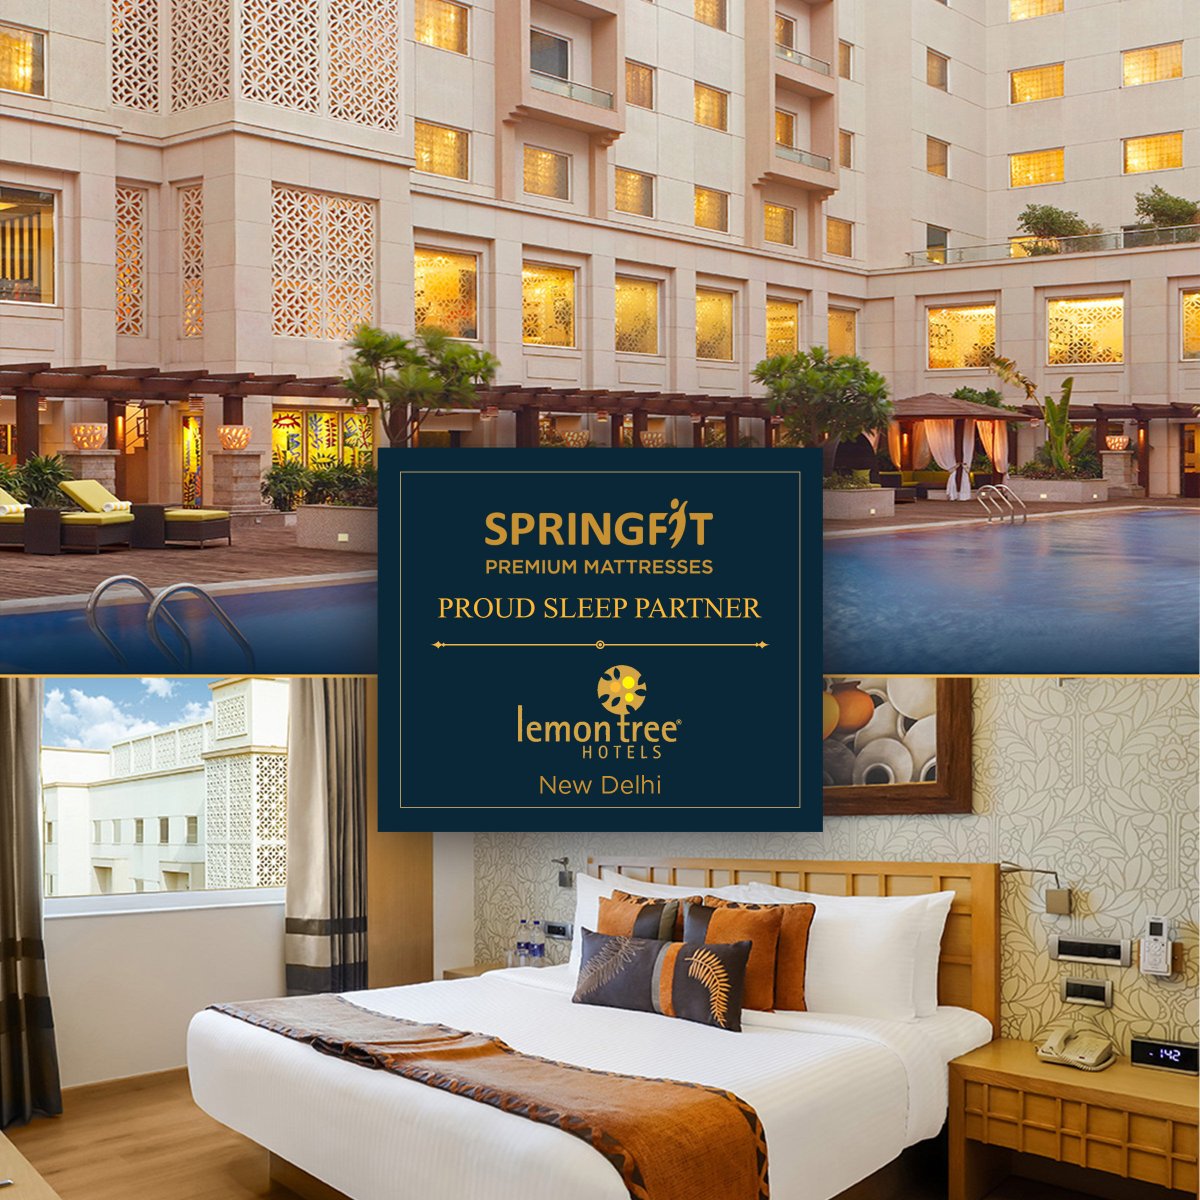 After a long day of meetings & business, unwind at the Lemon Tree Aerocity hotel, which features our Springfit #Premiummattresses.
#ProudSleepPartner

Visit at springfit.com

#LemonTreeHotels #SpringfitMattress #Mattress #Sleep #Hospitality #Hotelmattress #LuxuryHotel